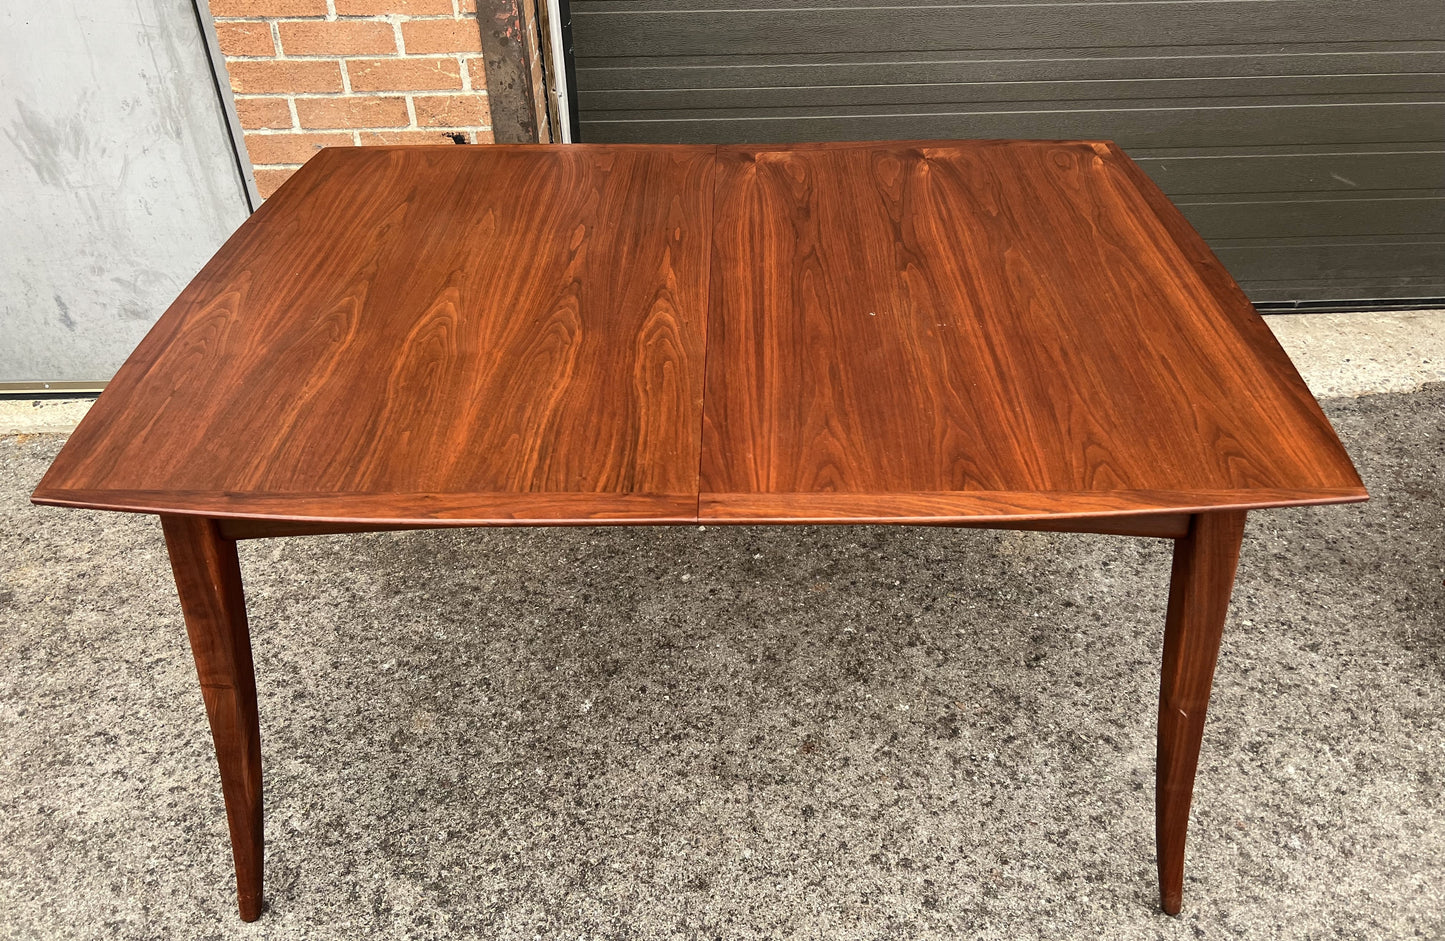 REFINISHED Mid Century Modern Walnut Table w 3 Leaves by R. Spanner 55"- 97"